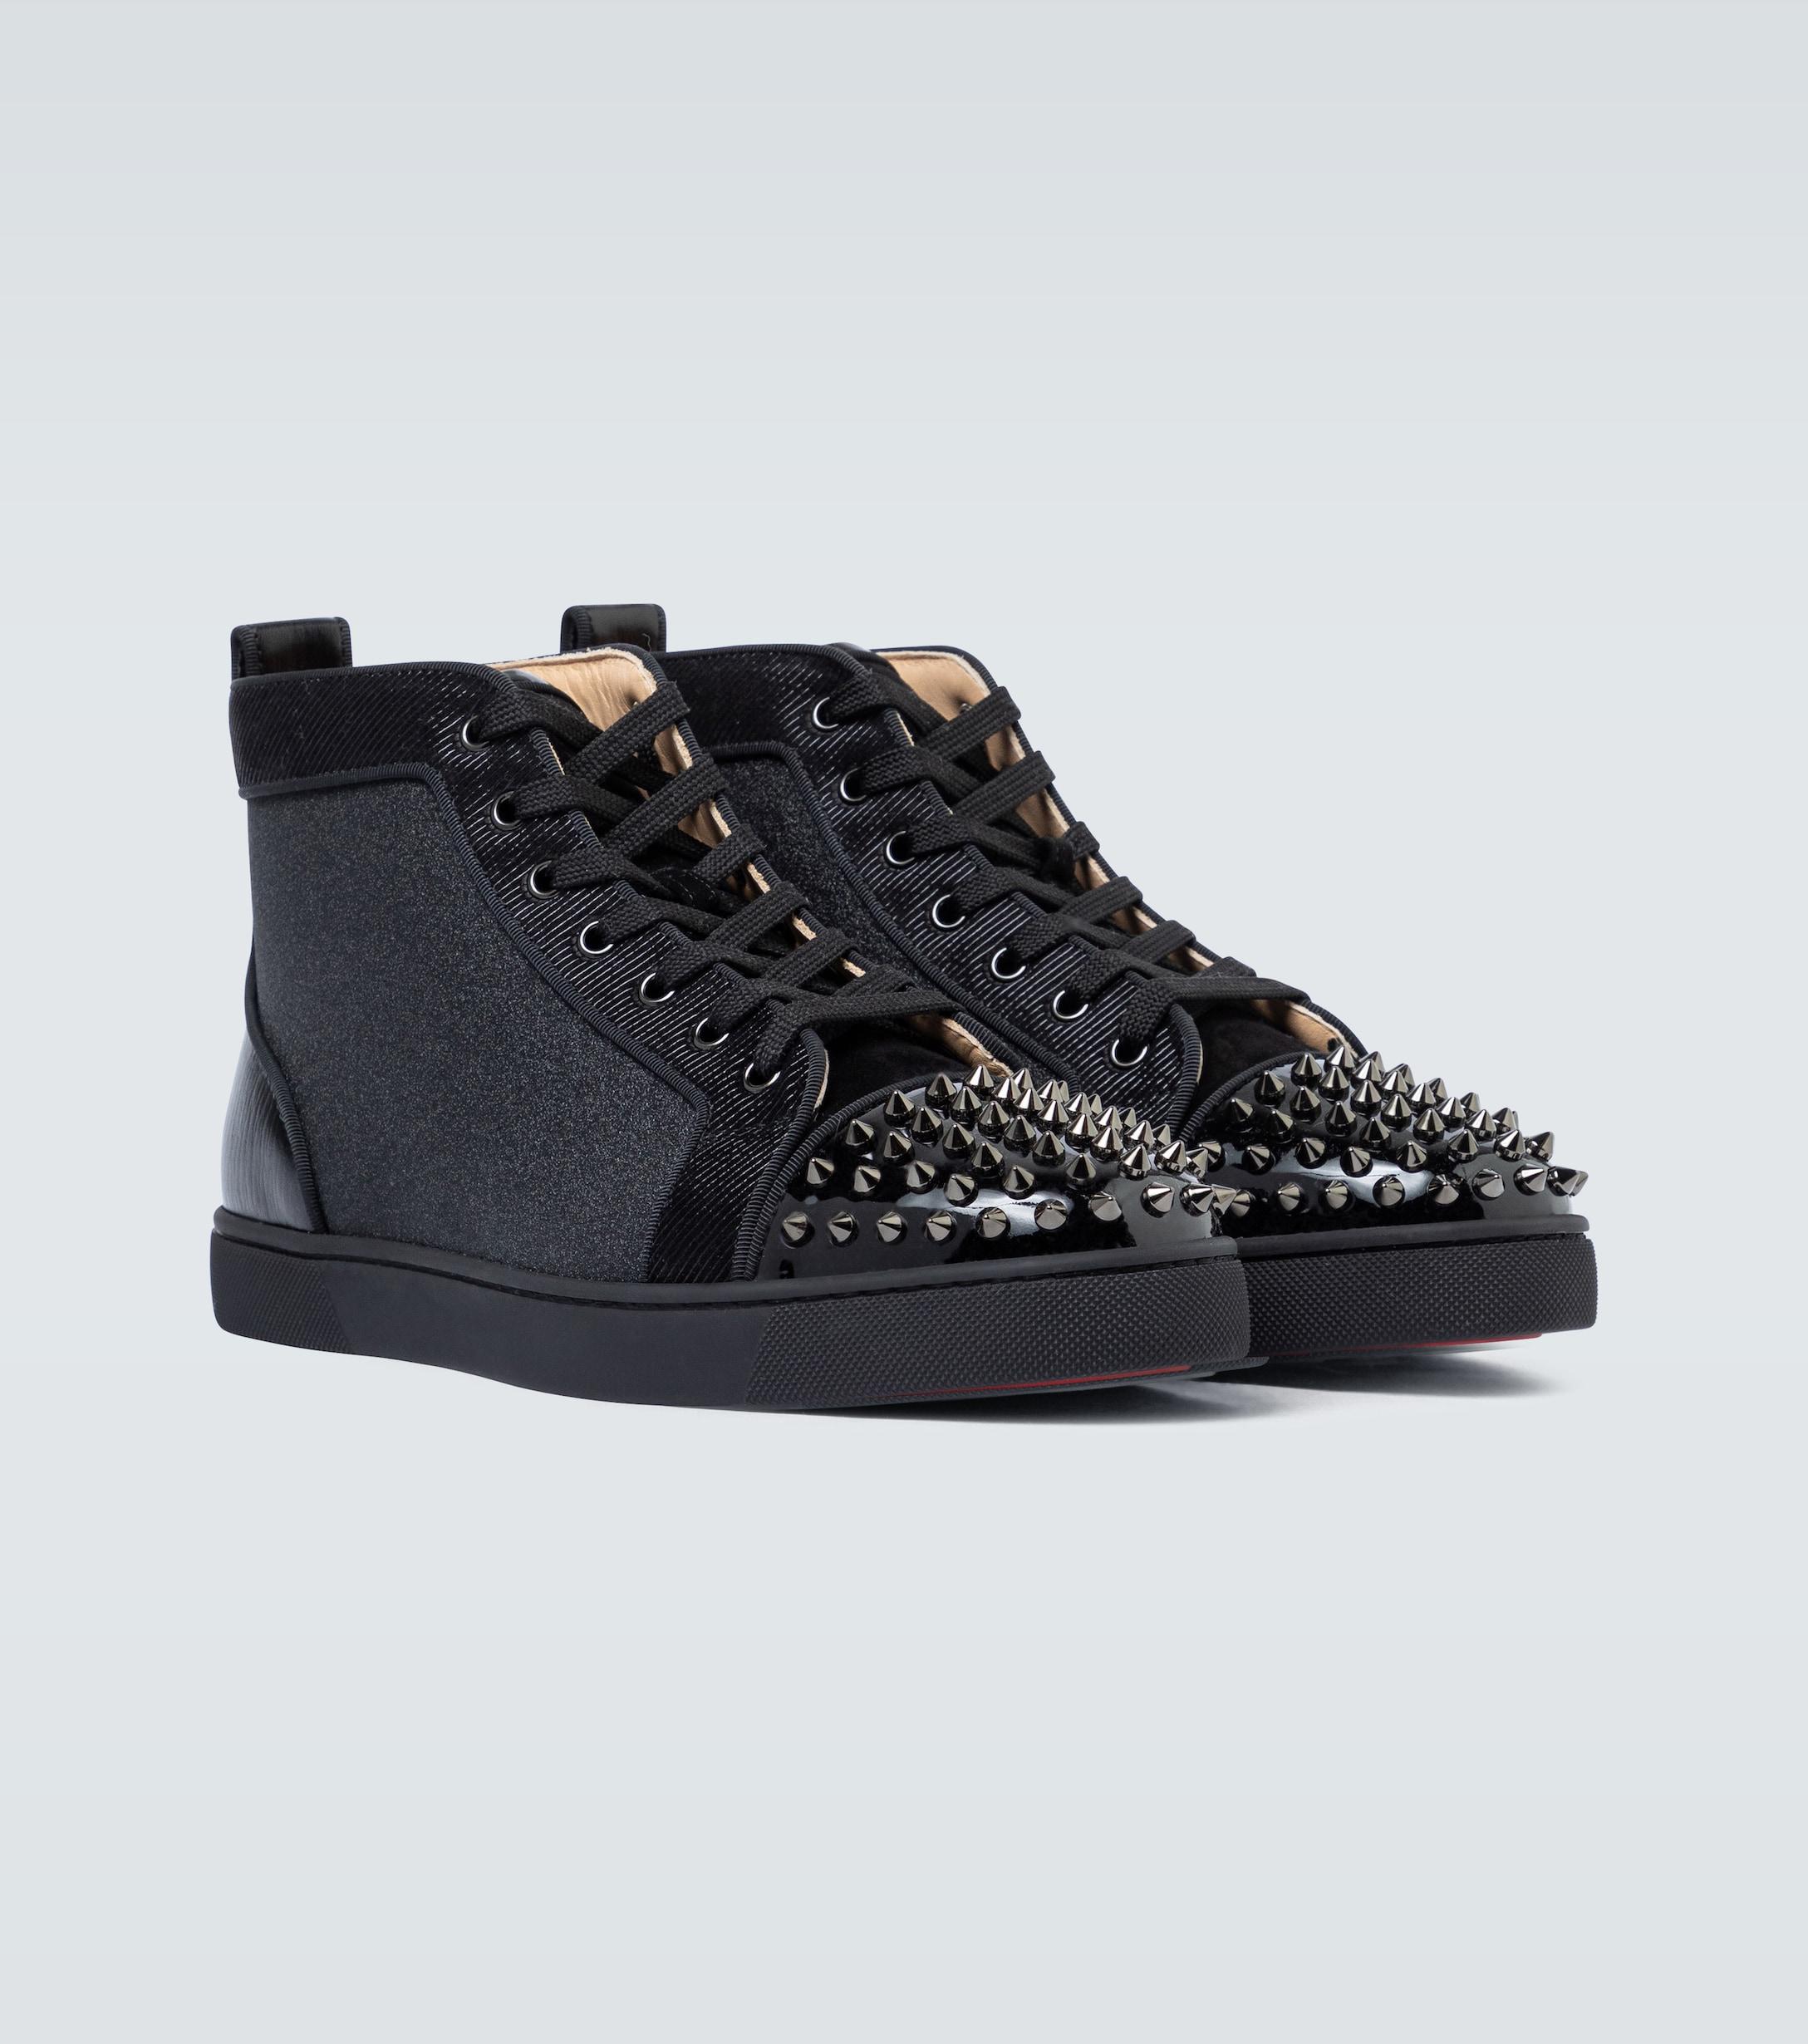 Christian Louboutin Orlato High Top Sneakers in Black for Men Save 10% - Lyst